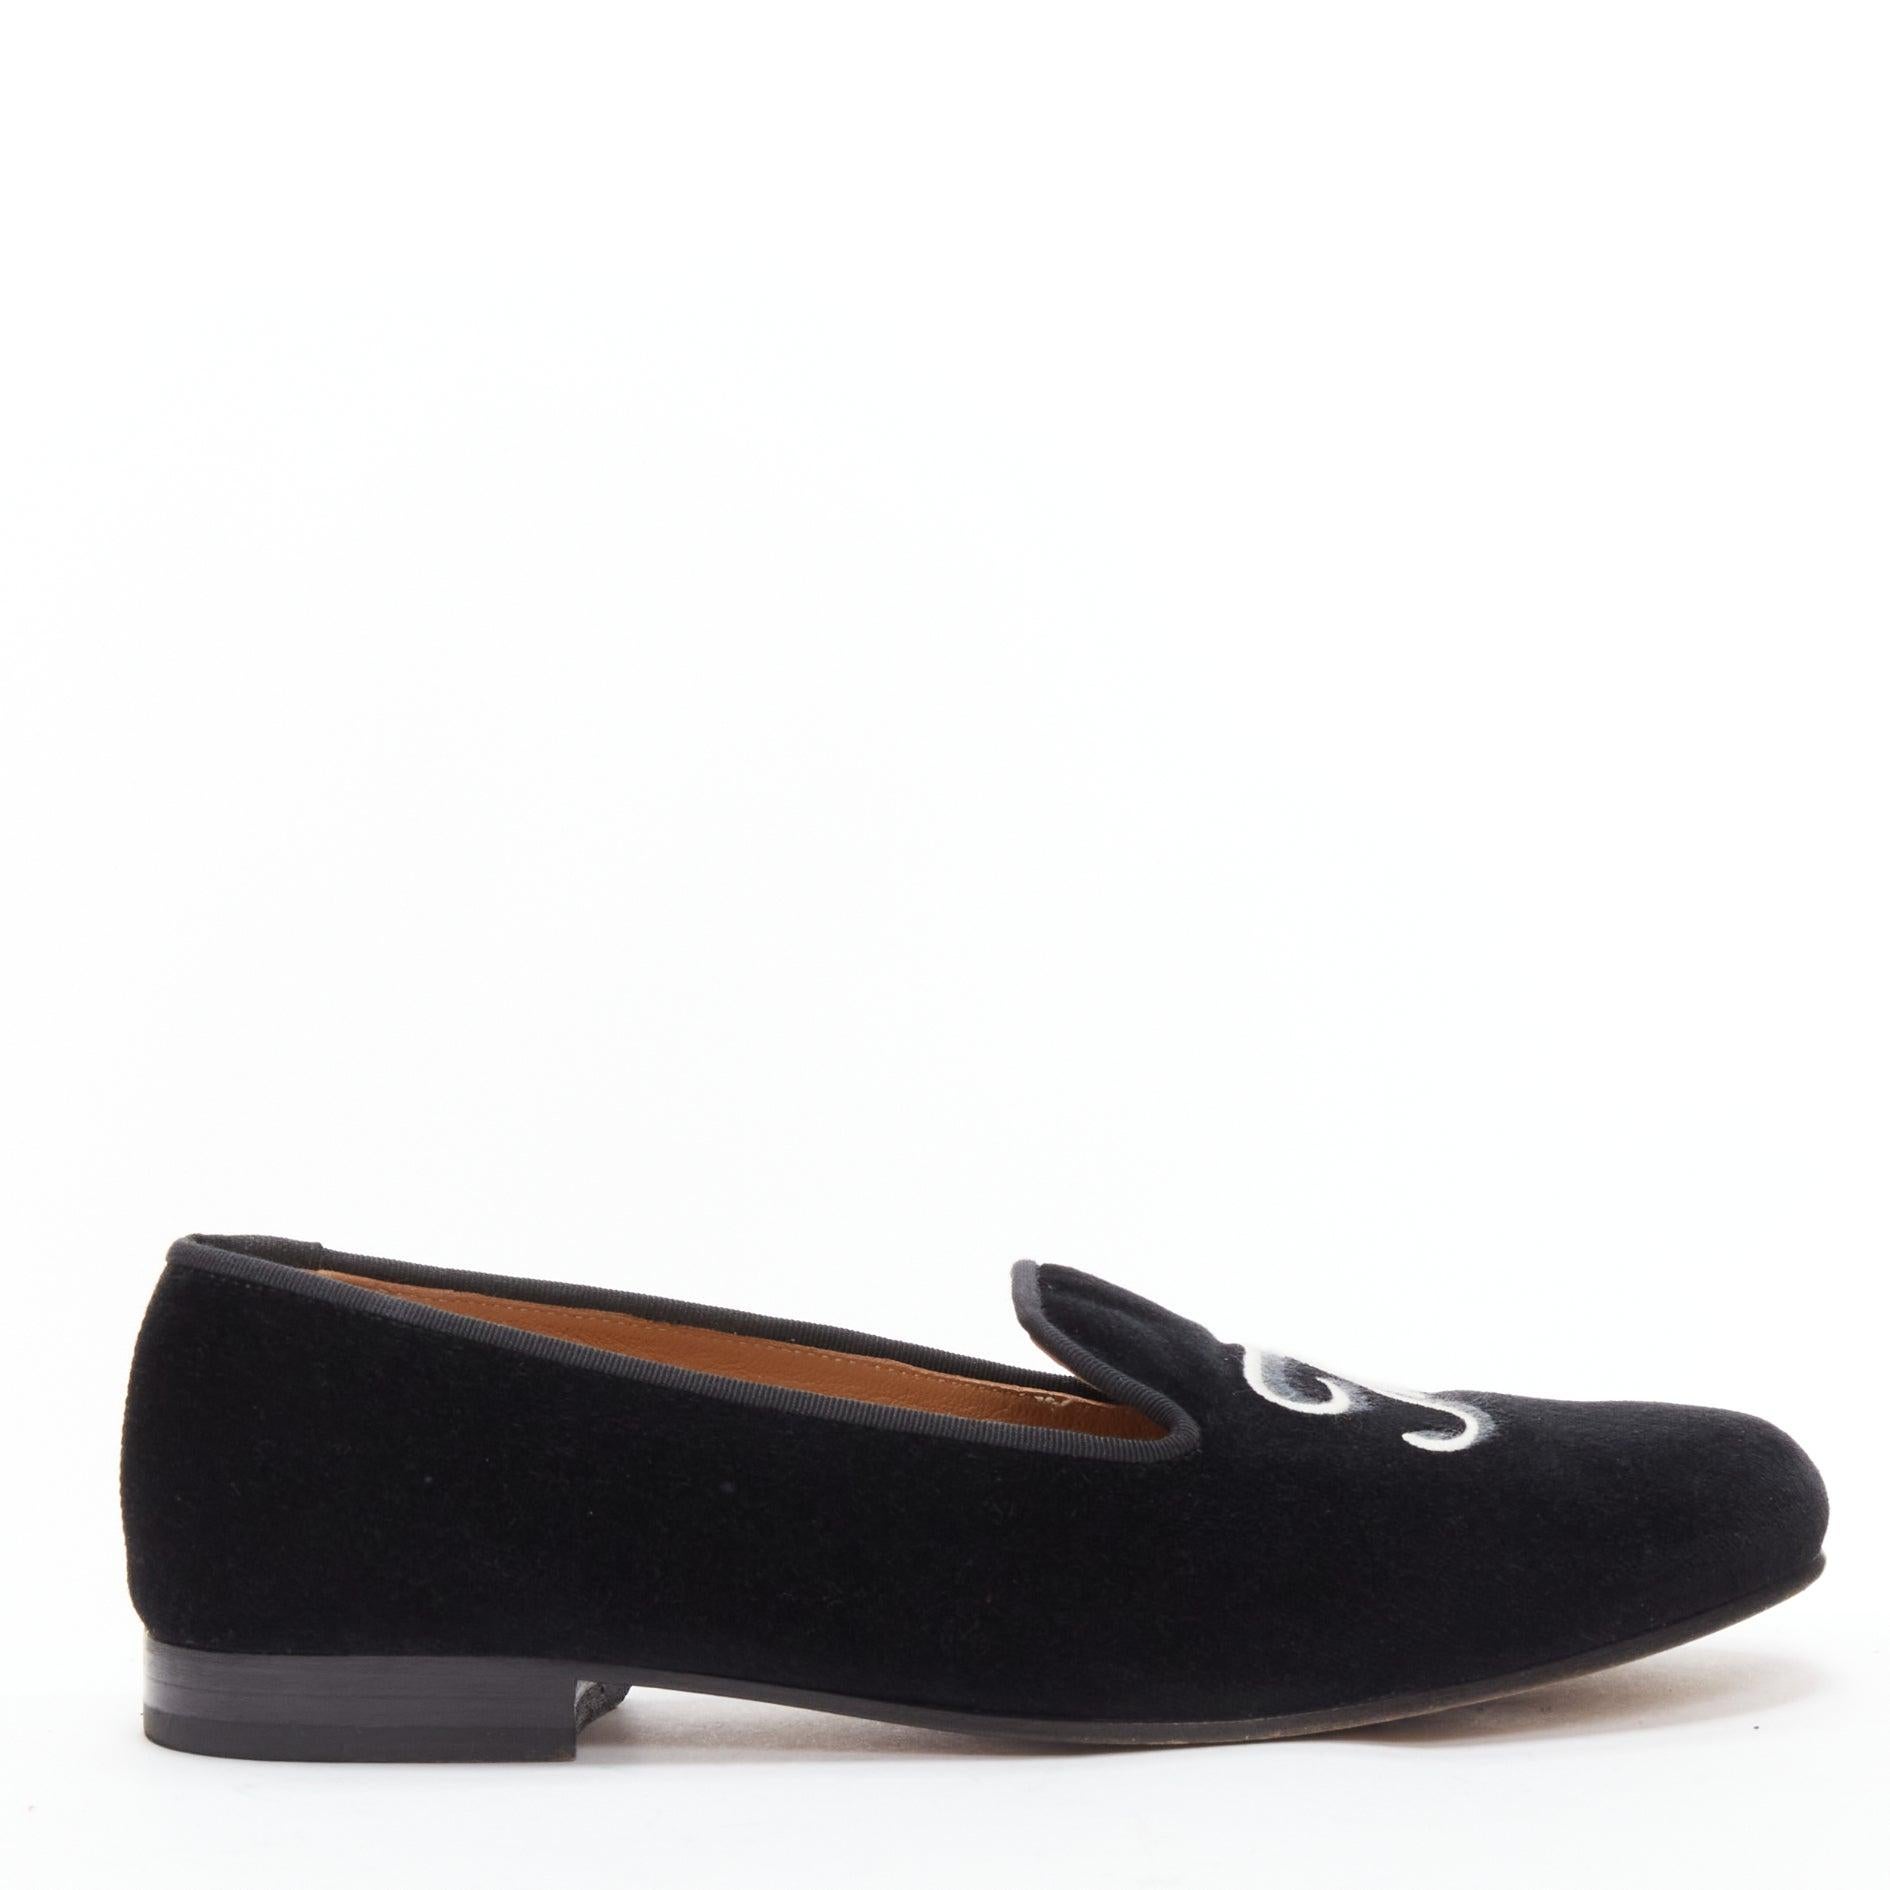 STUBBS WOOTTON The End embroidery black velvet loafer smoking slippers US9 EU42
Reference: JSLE/A00097
Brand: Stubbs Wootton
Model: The End
Material: Velvet, Leather
Color: Black, White
Pattern: Solid
Closure: Slip On
Lining: Nude Leather
Made in: